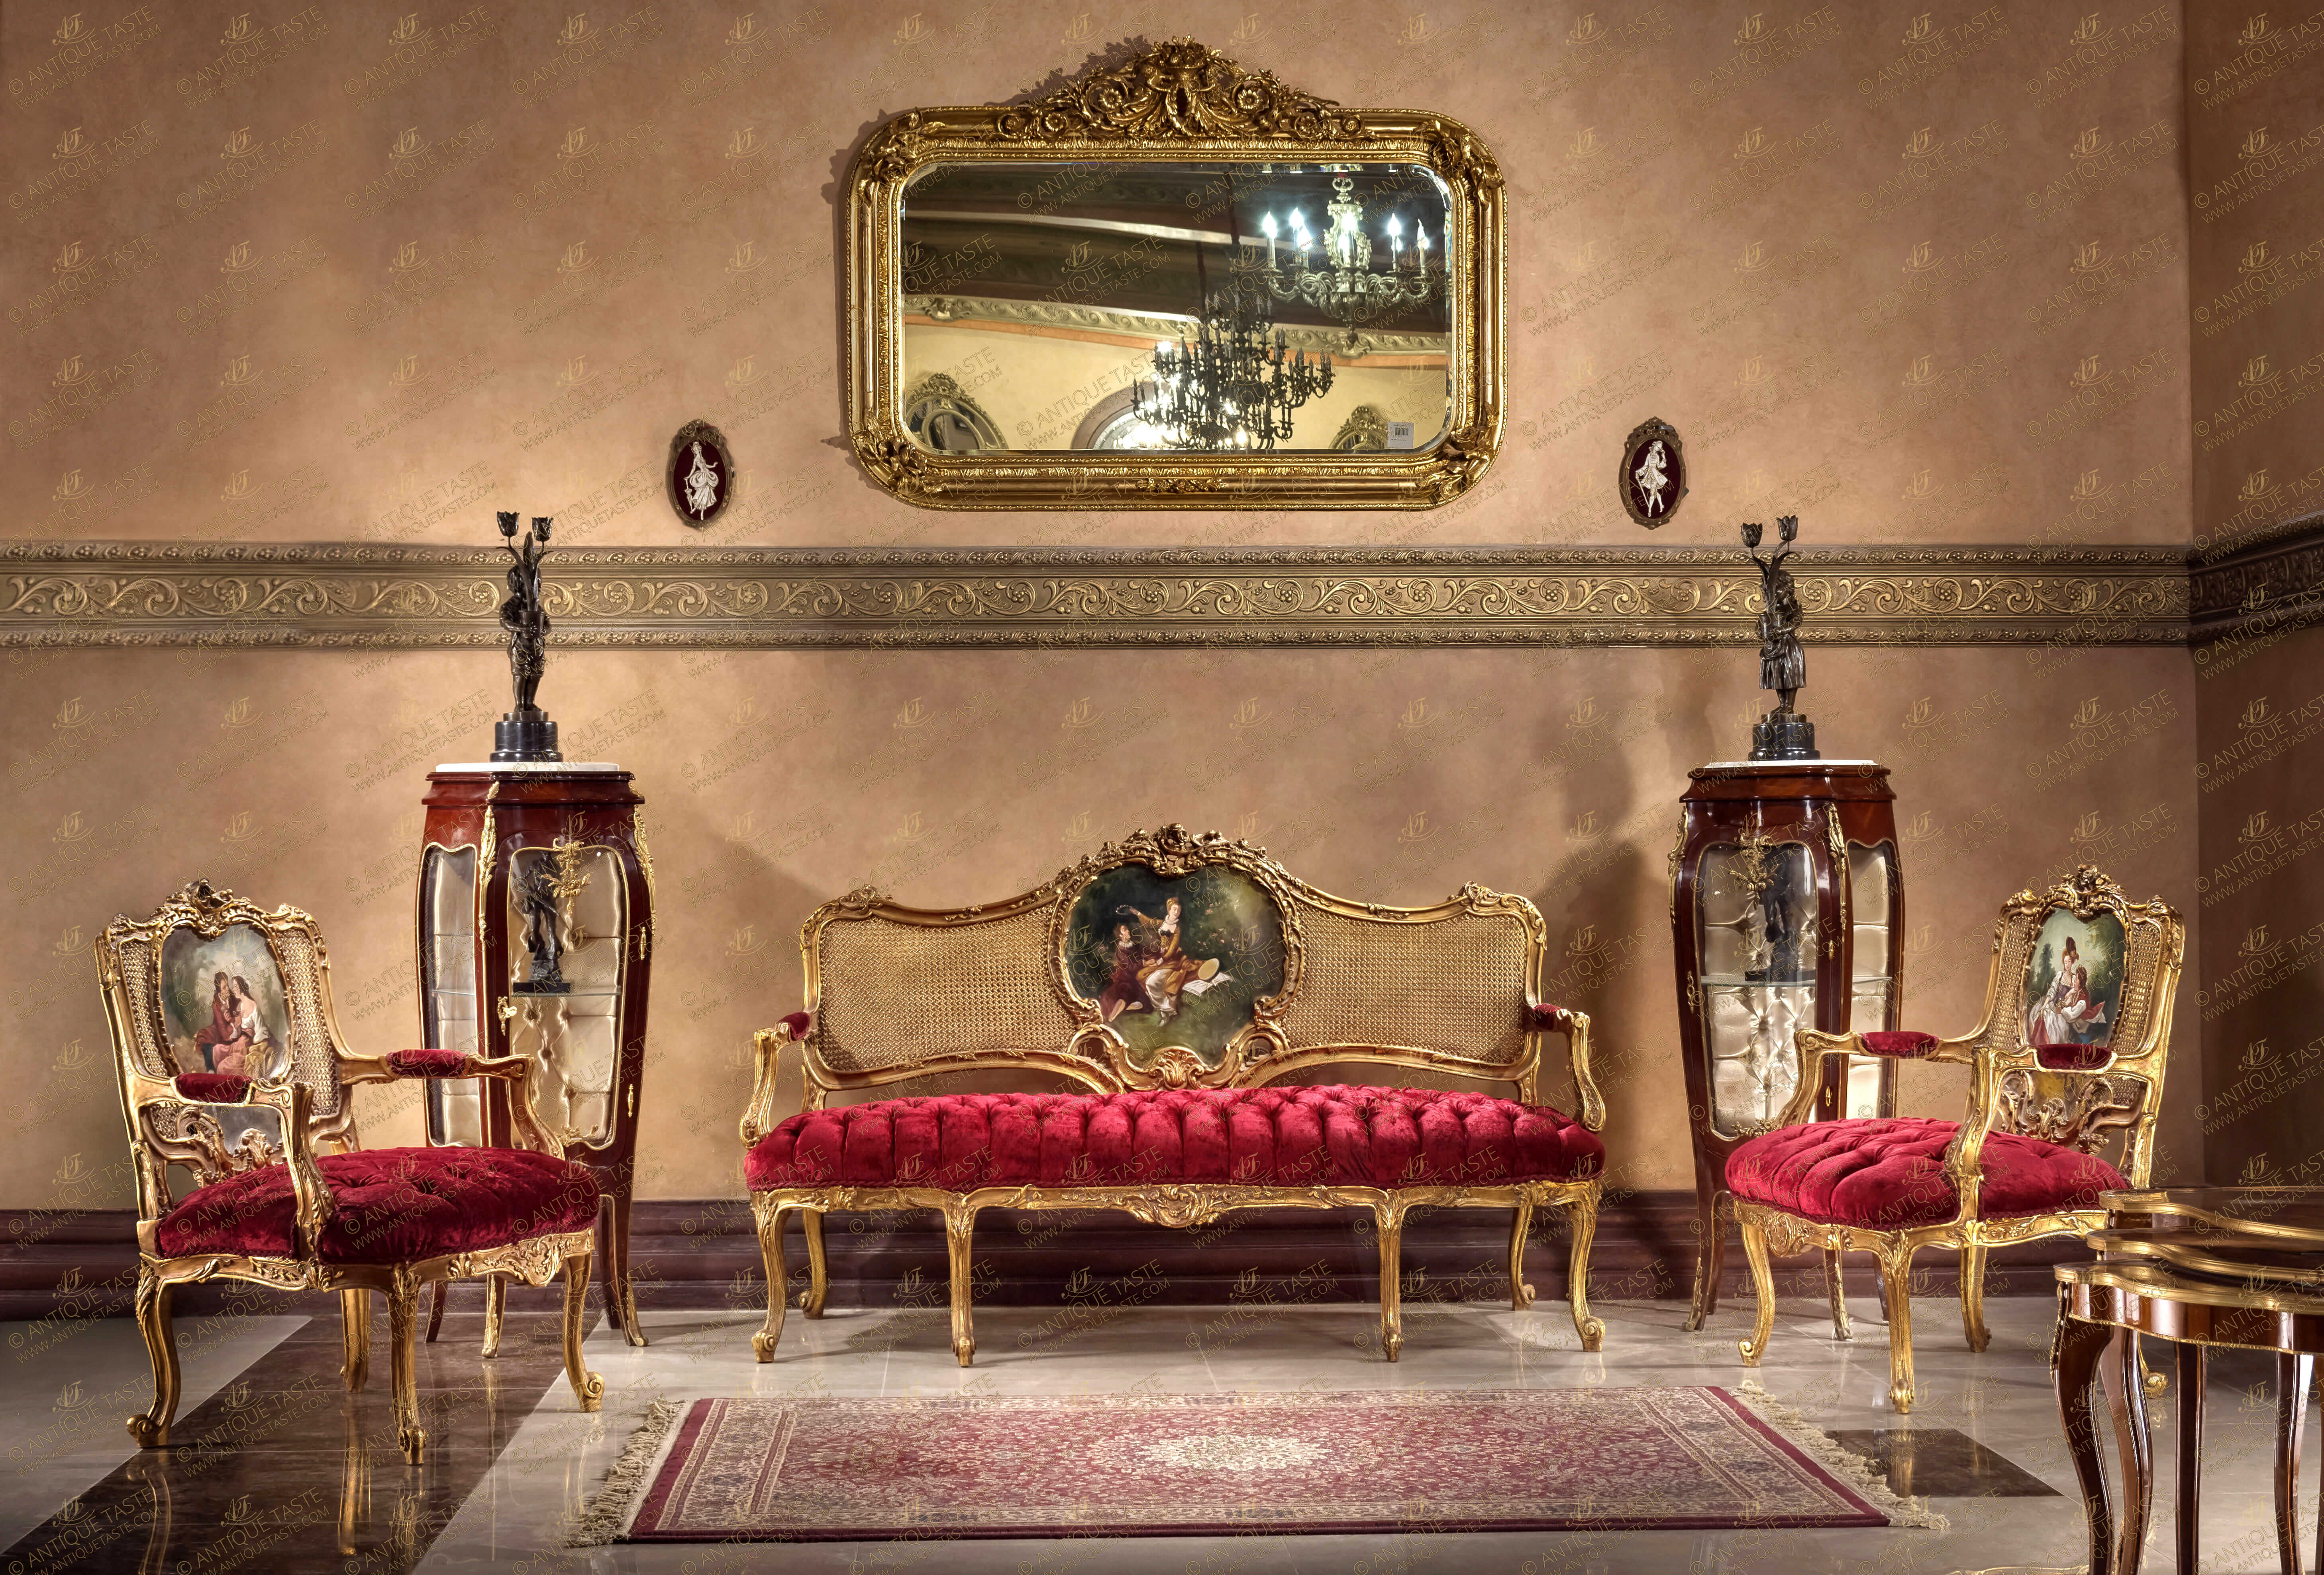 A very charming French 19th century Louis XV, Rococo and Vernis Martin Salon Set of one sofa and two armchairs; raised by fine cabriole legs with elegant scrolled feet; above each leg is a lovely acanthus carving, centered by an arbalest shaped frieze, with an elegant carved foliate scrolling reserve; upholstered with velvet in tufted style the fascinating back of the set is in cane and exquisite acanthus carvings, vines and scrolling blossoming foliage centered with different hand paintings of romantic court scenes inspired from François Boucher collections.